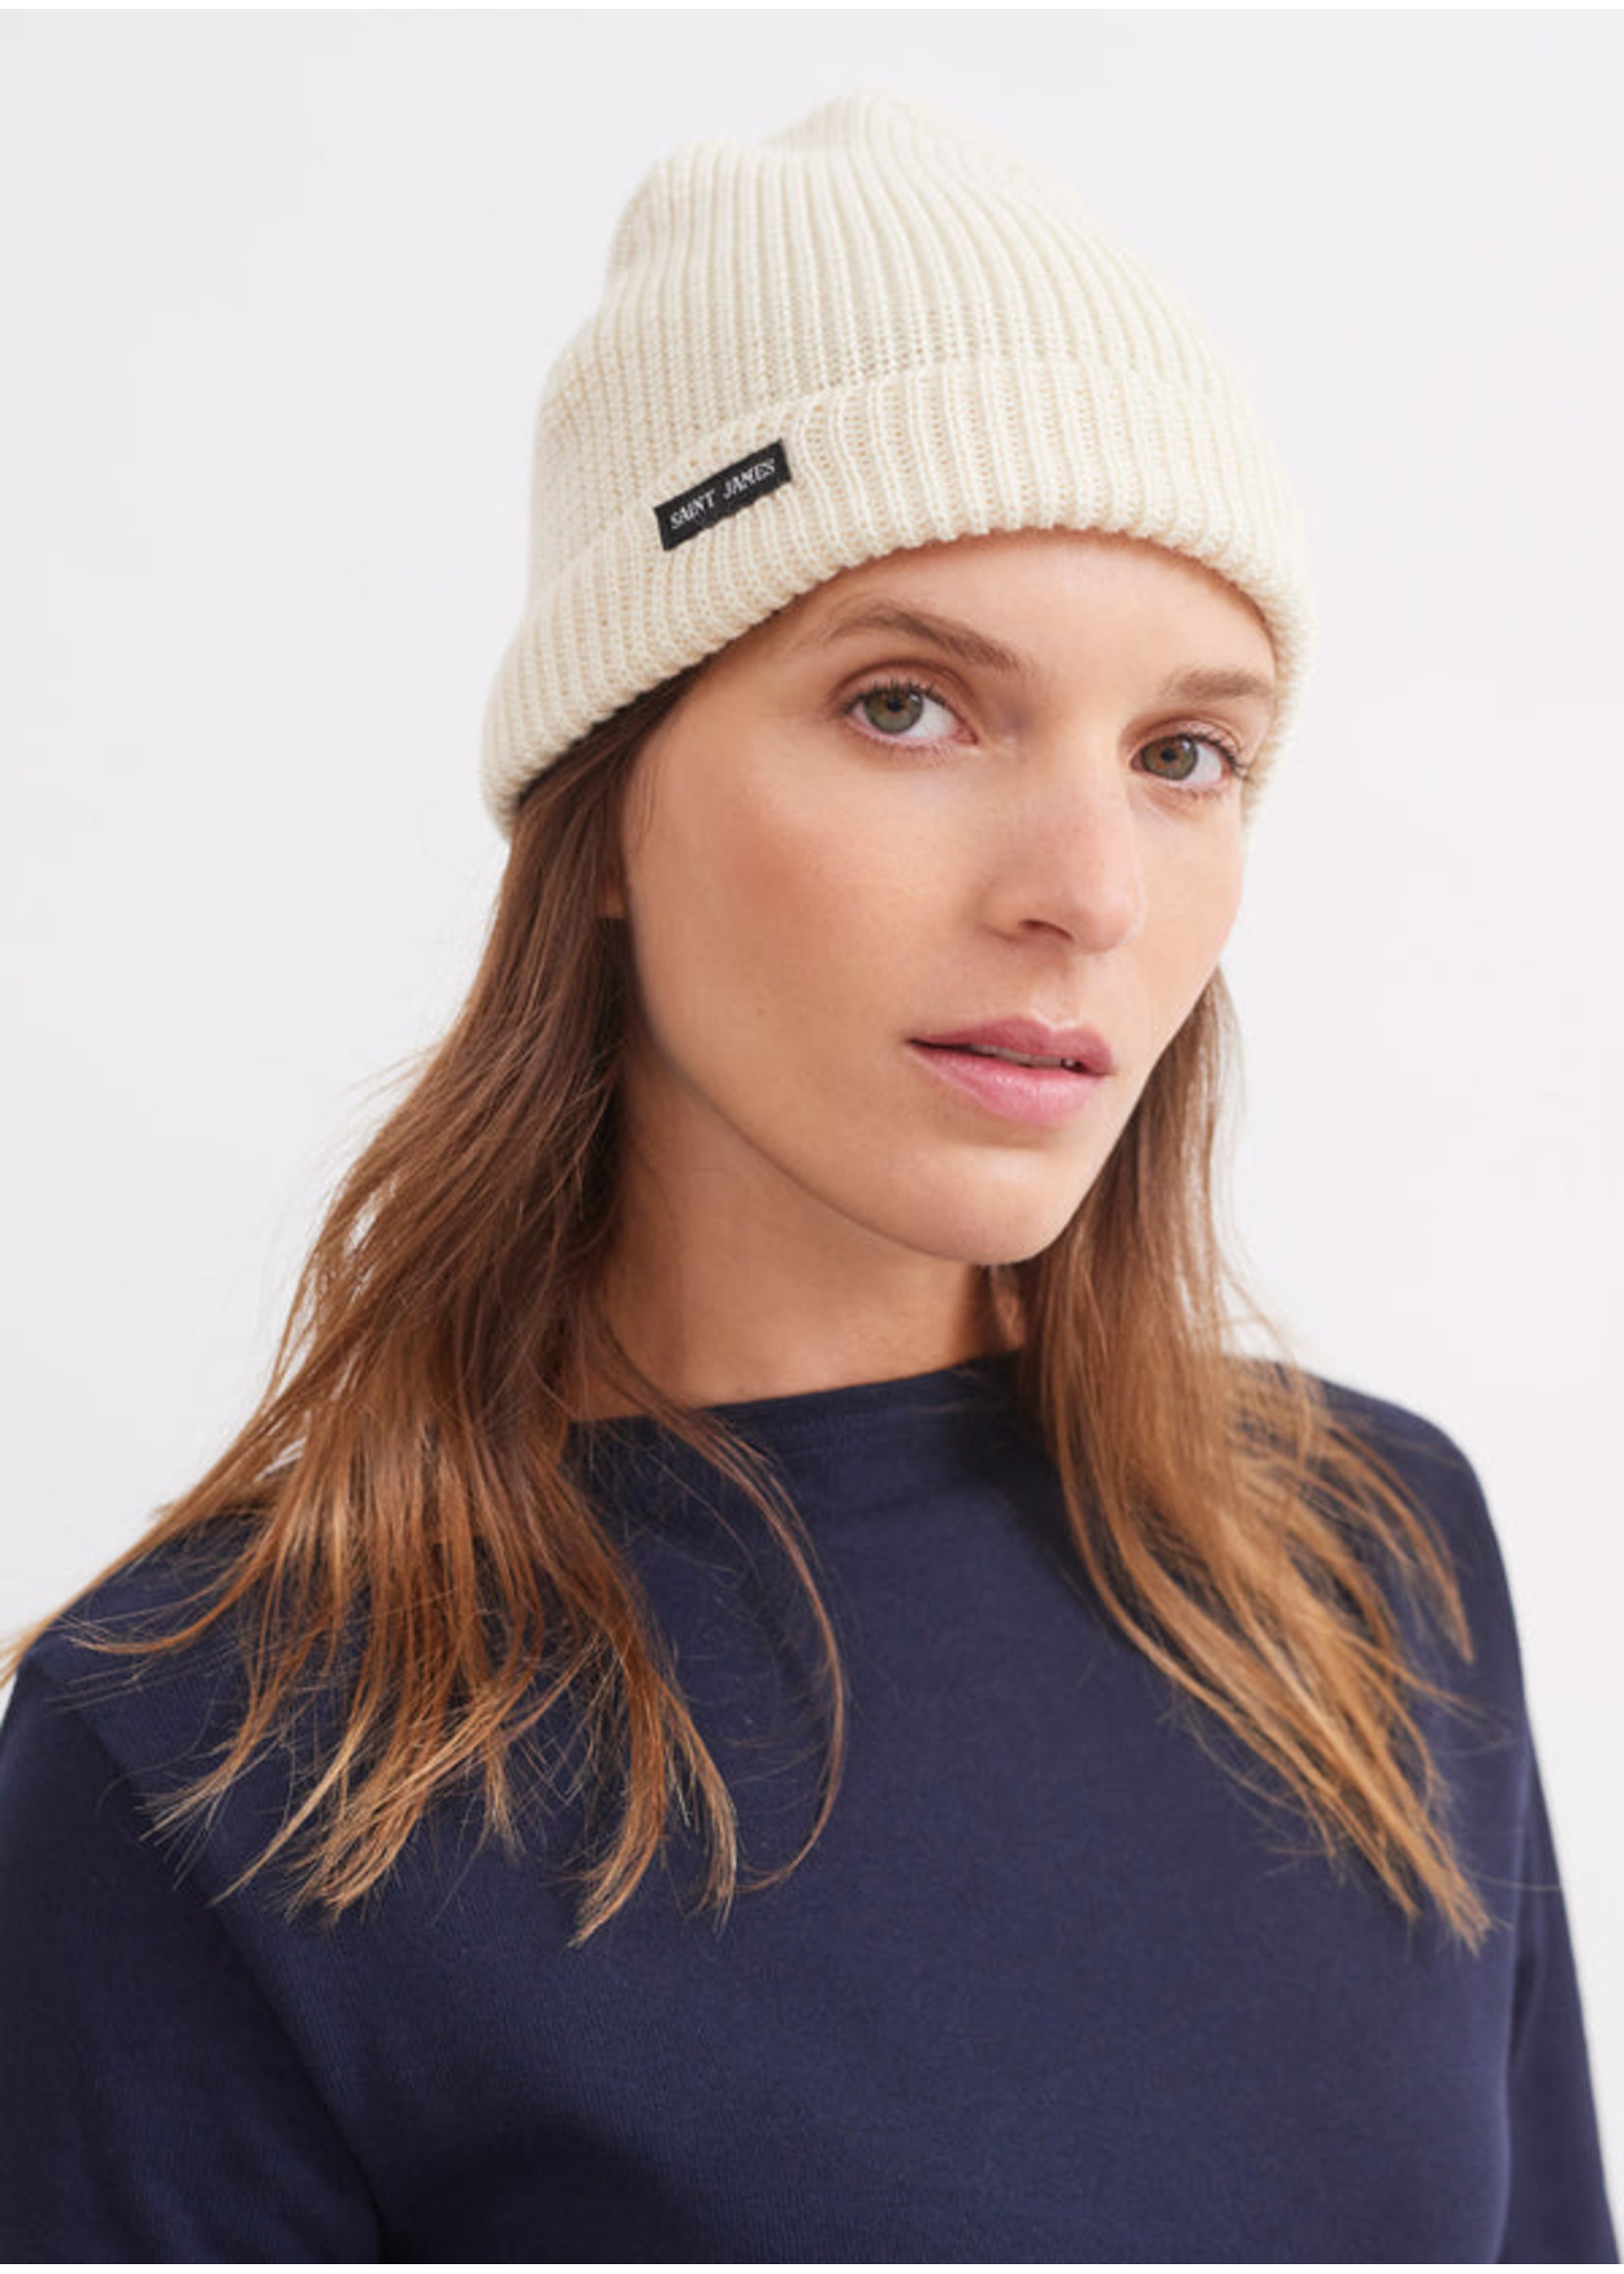 Unisex knitted wool beanie - espace Lacroix boutique